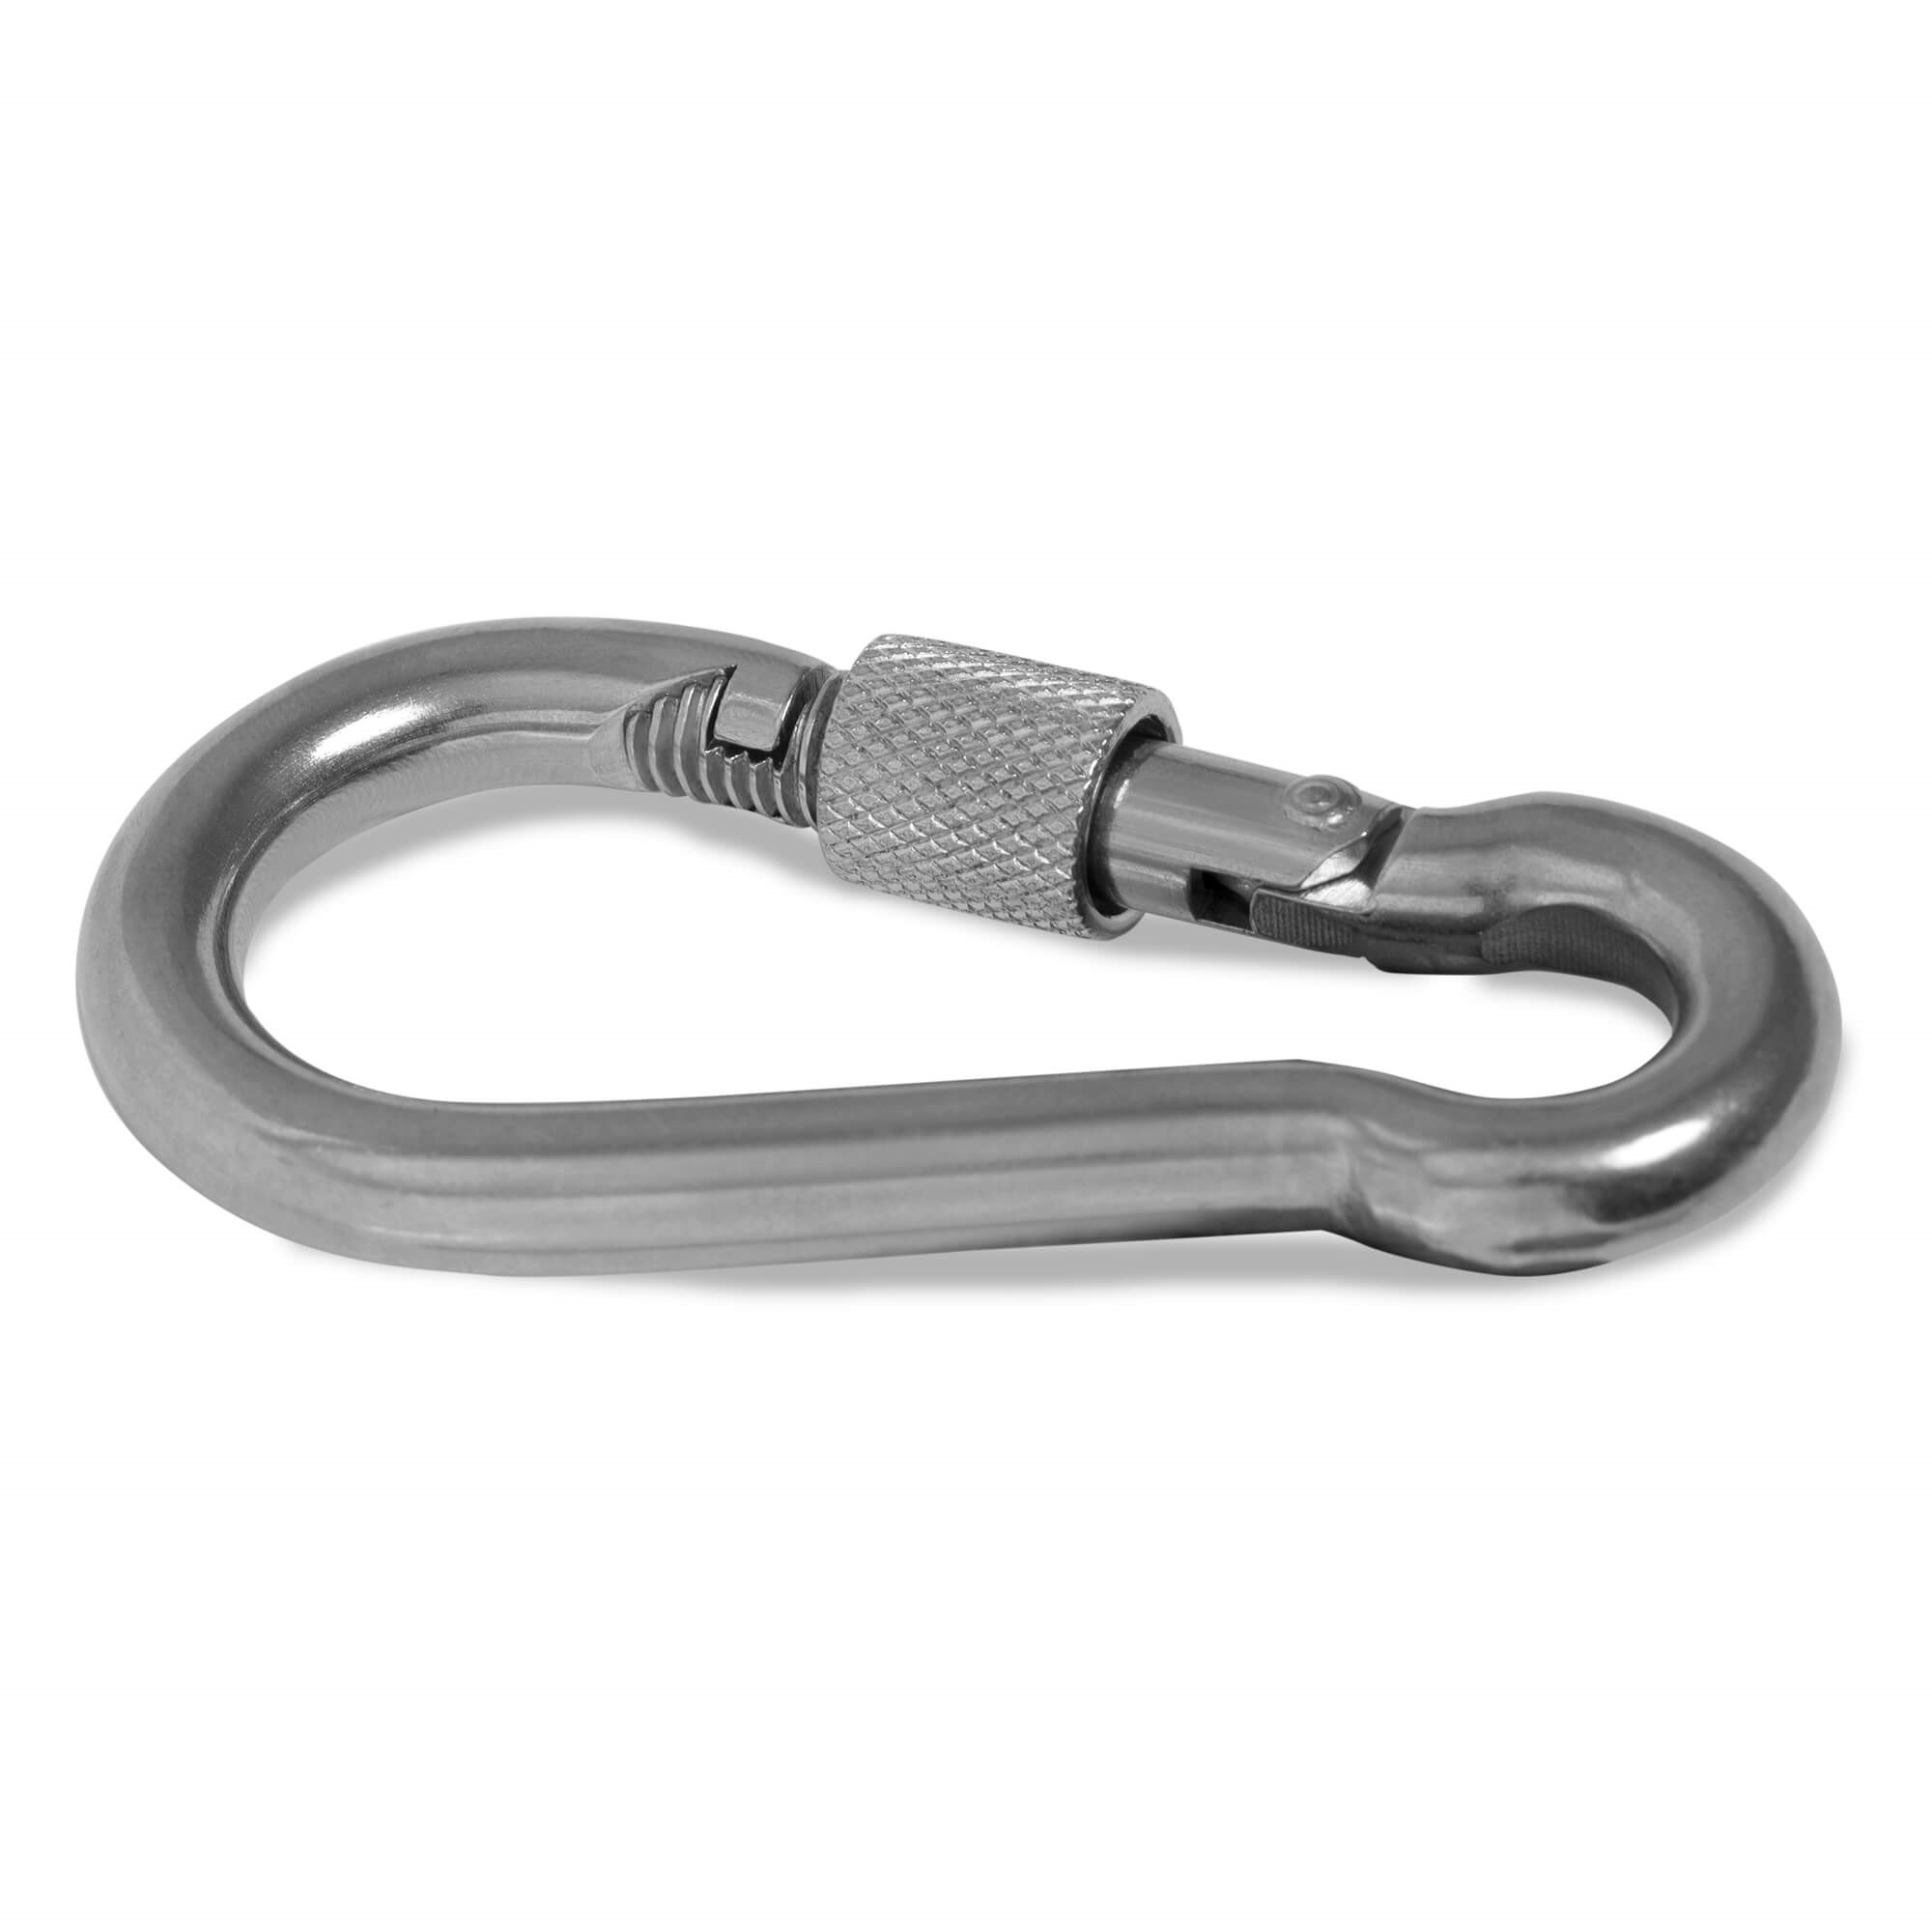 Firefighter snap hook 50mm x 5mm with screw stainless steel AISI 316 (V4A) (10 pieces) Snap hook firefighter snap hook firefighter snap hook quick release